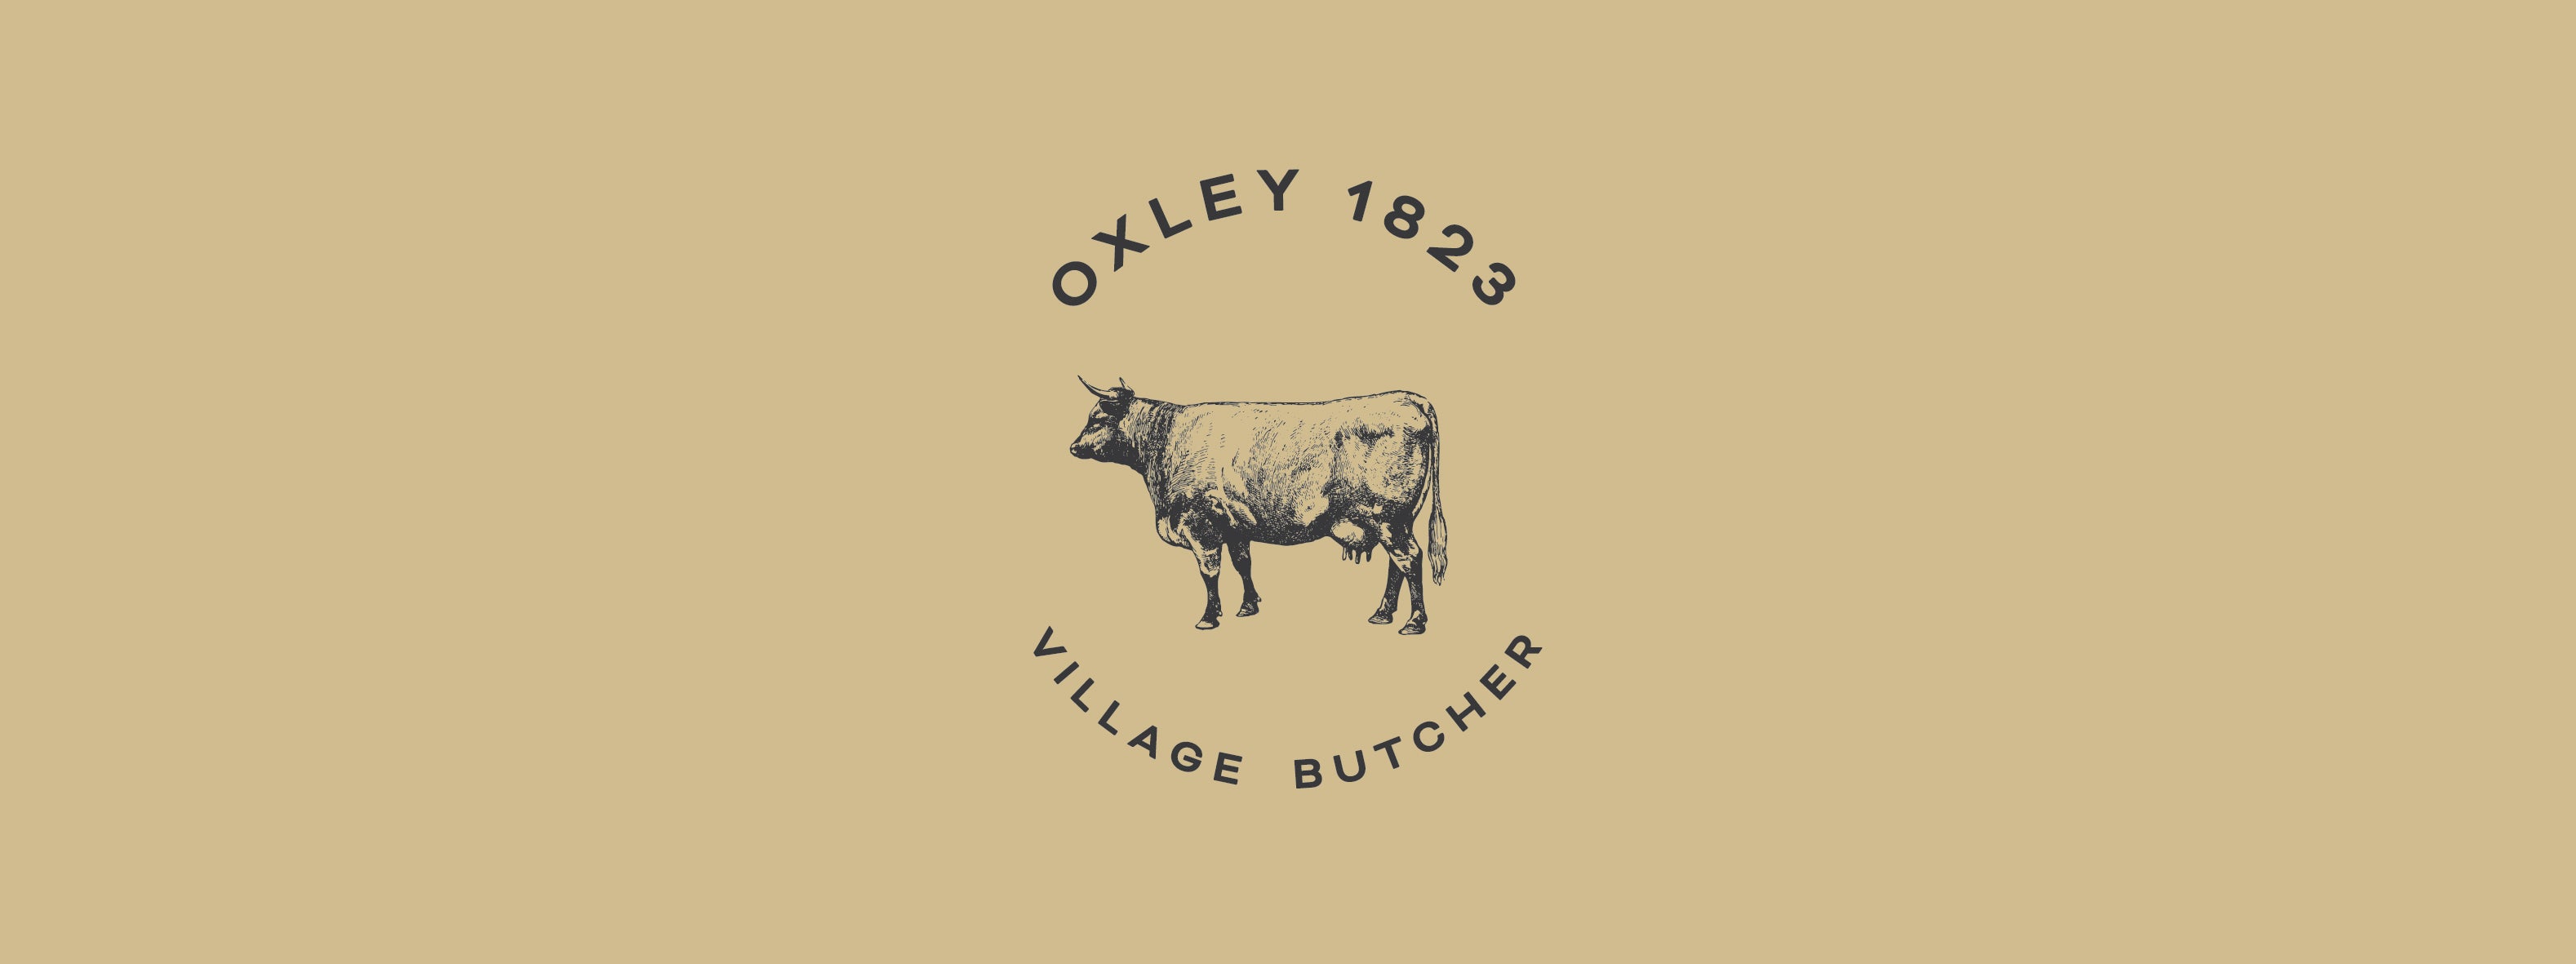 Village Butcher – The Oxley 1823